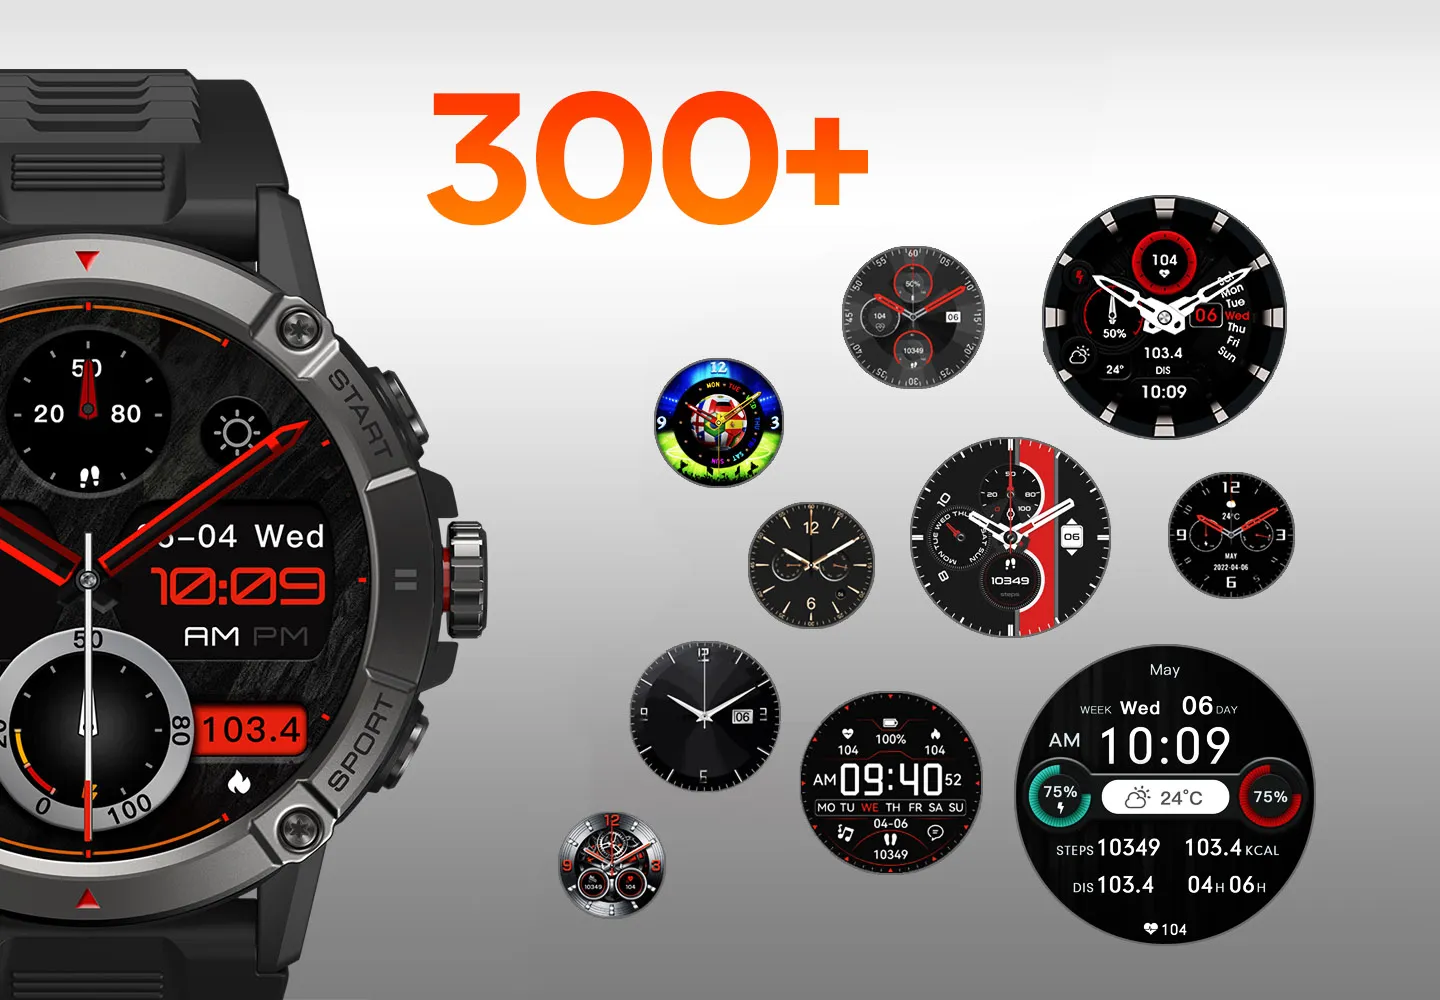 Many watch faces and Zeblaze Ares 3